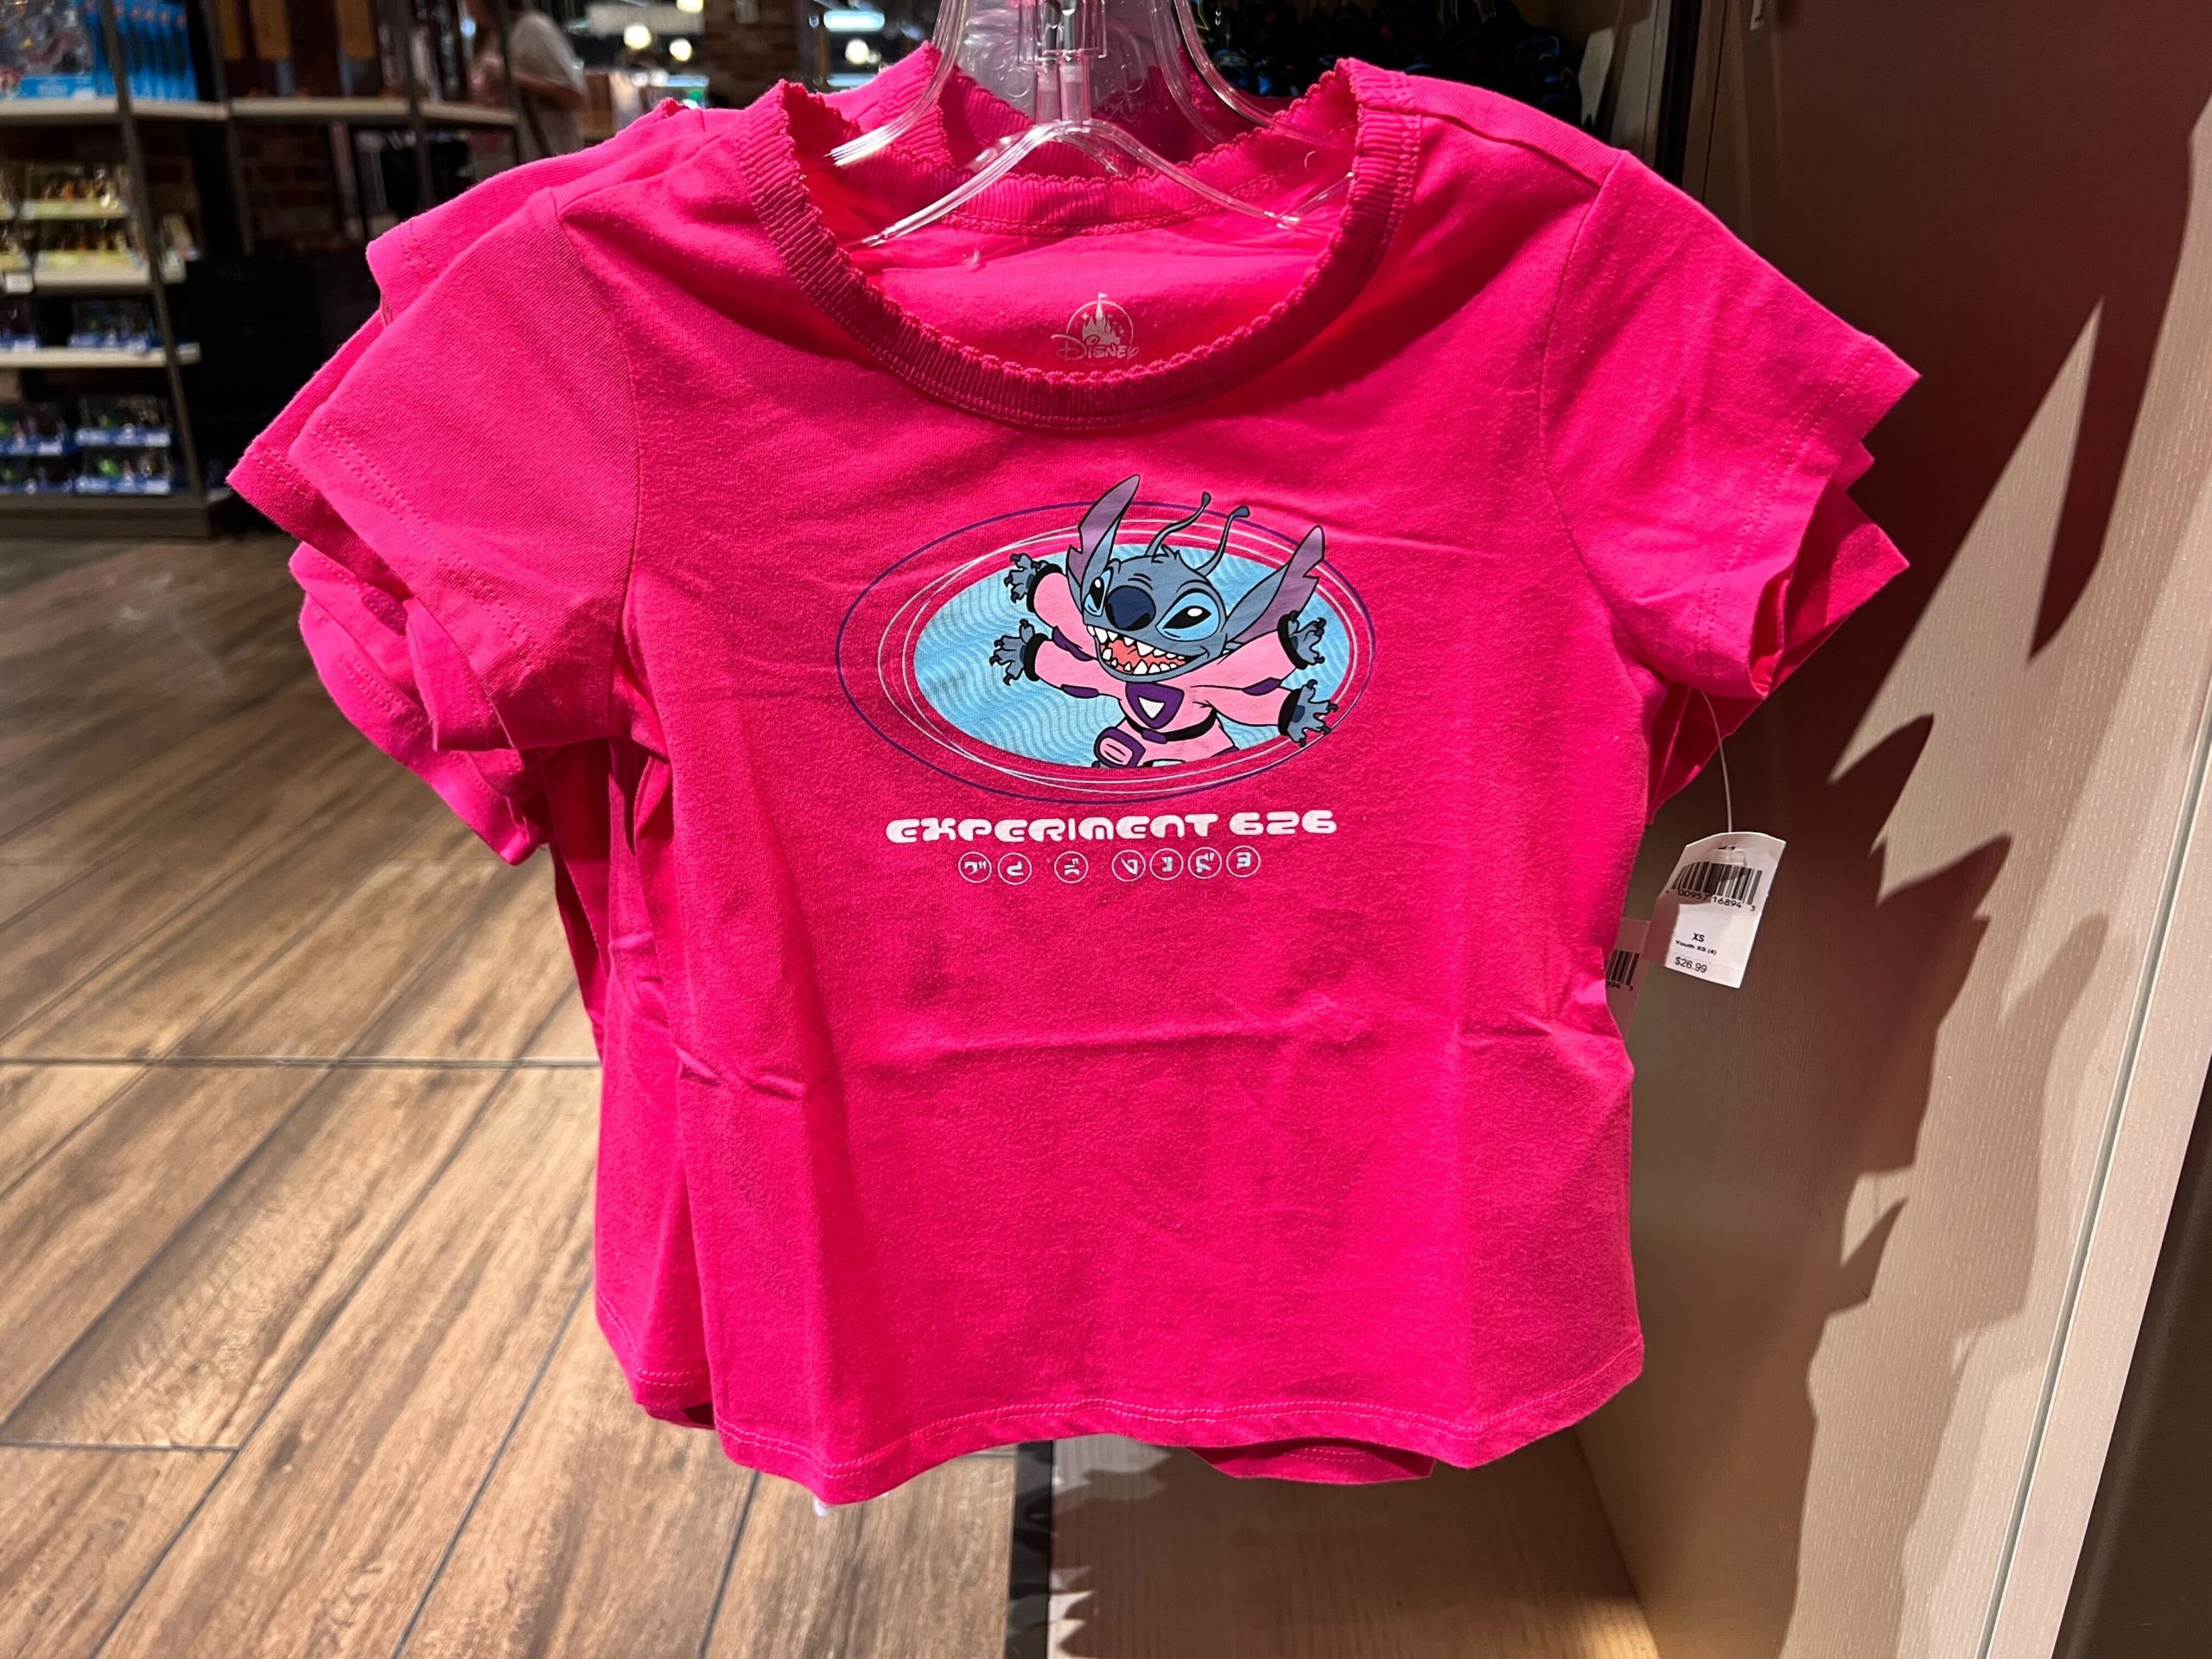 New Tropical Stitch Merchandise Collection Available at Disneyland Resort -  WDW News Today